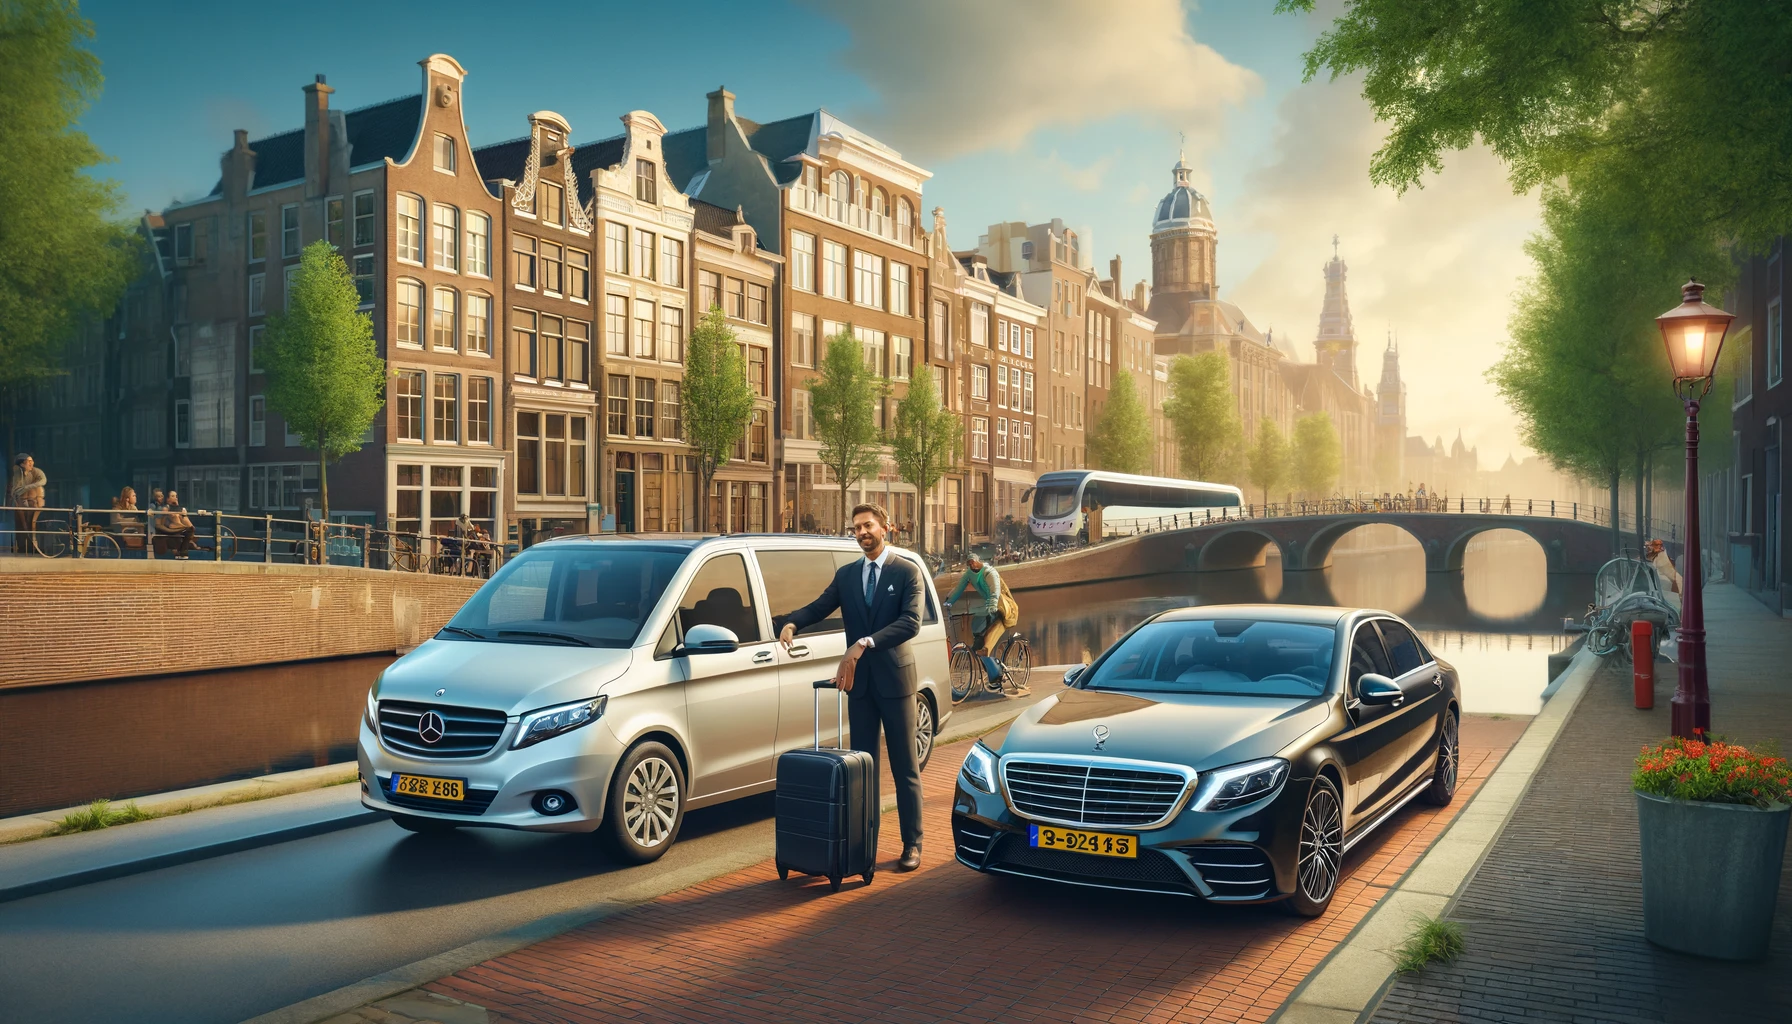 A business professional standing beside luxury vehicles in Amsterdam, with historic buildings and a canal in the background.